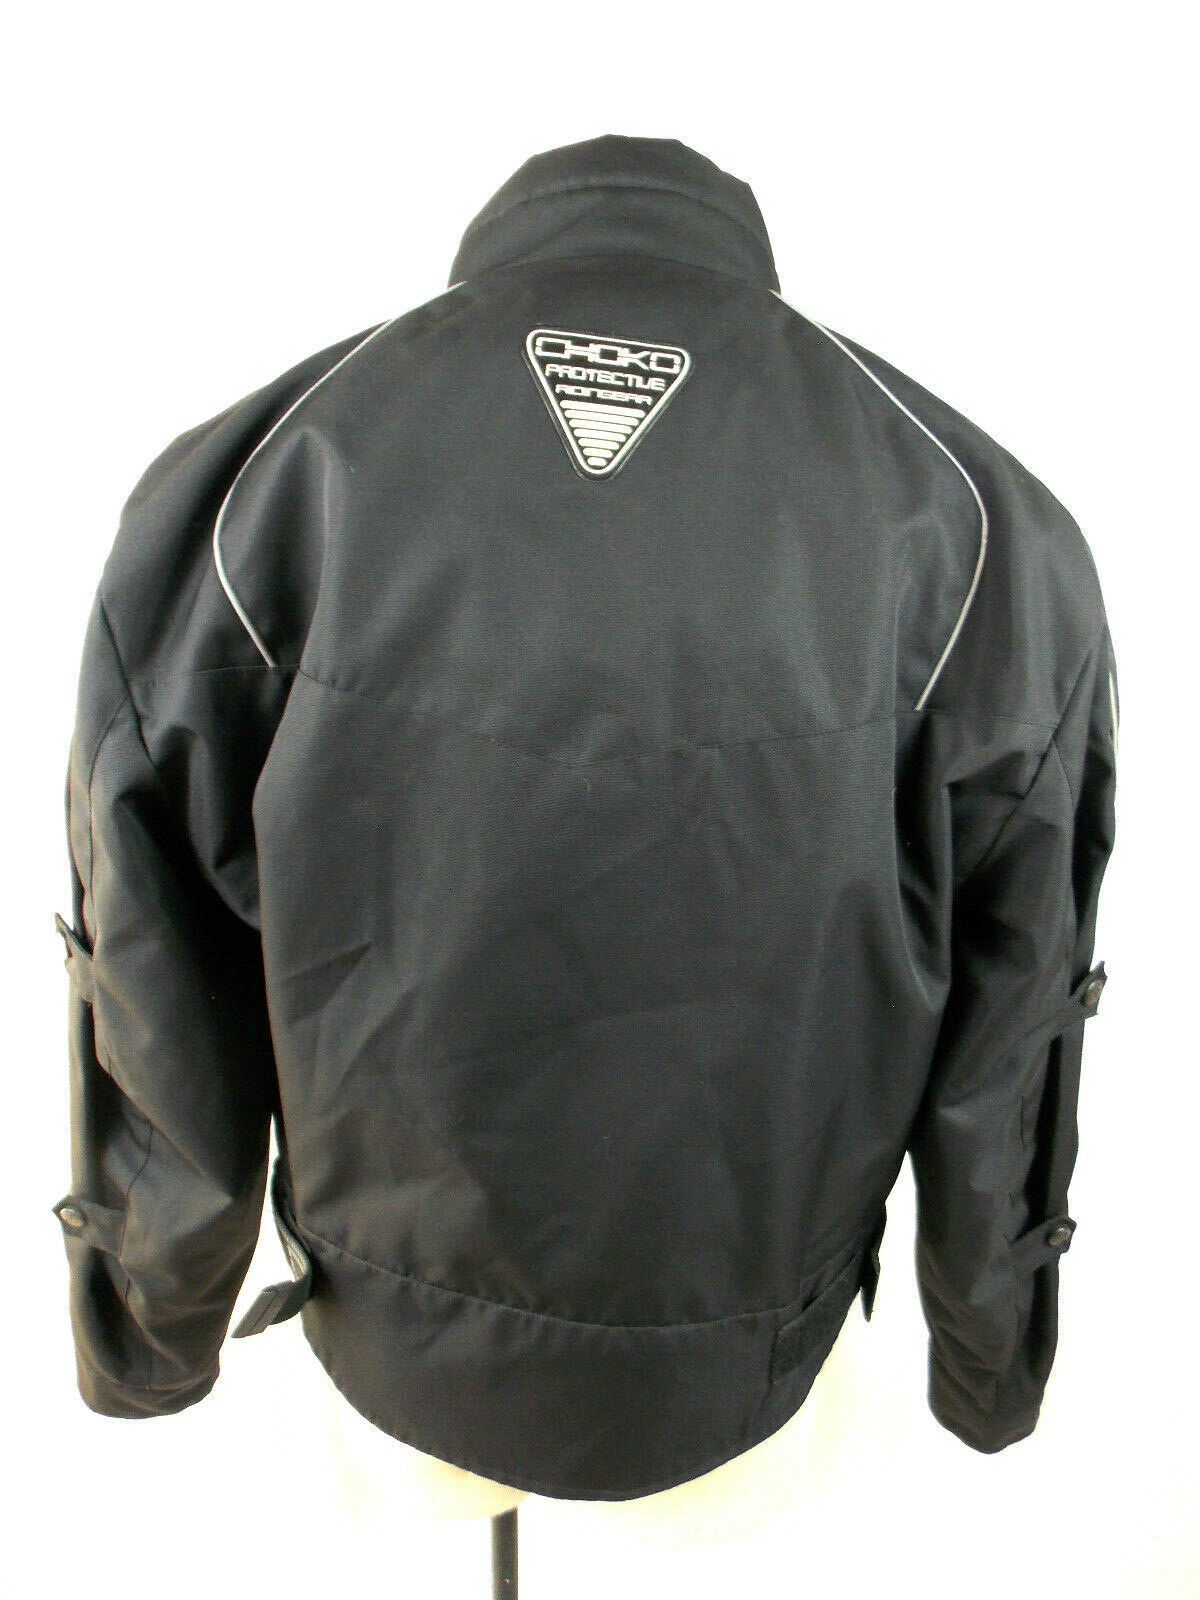 cycle gear jackets